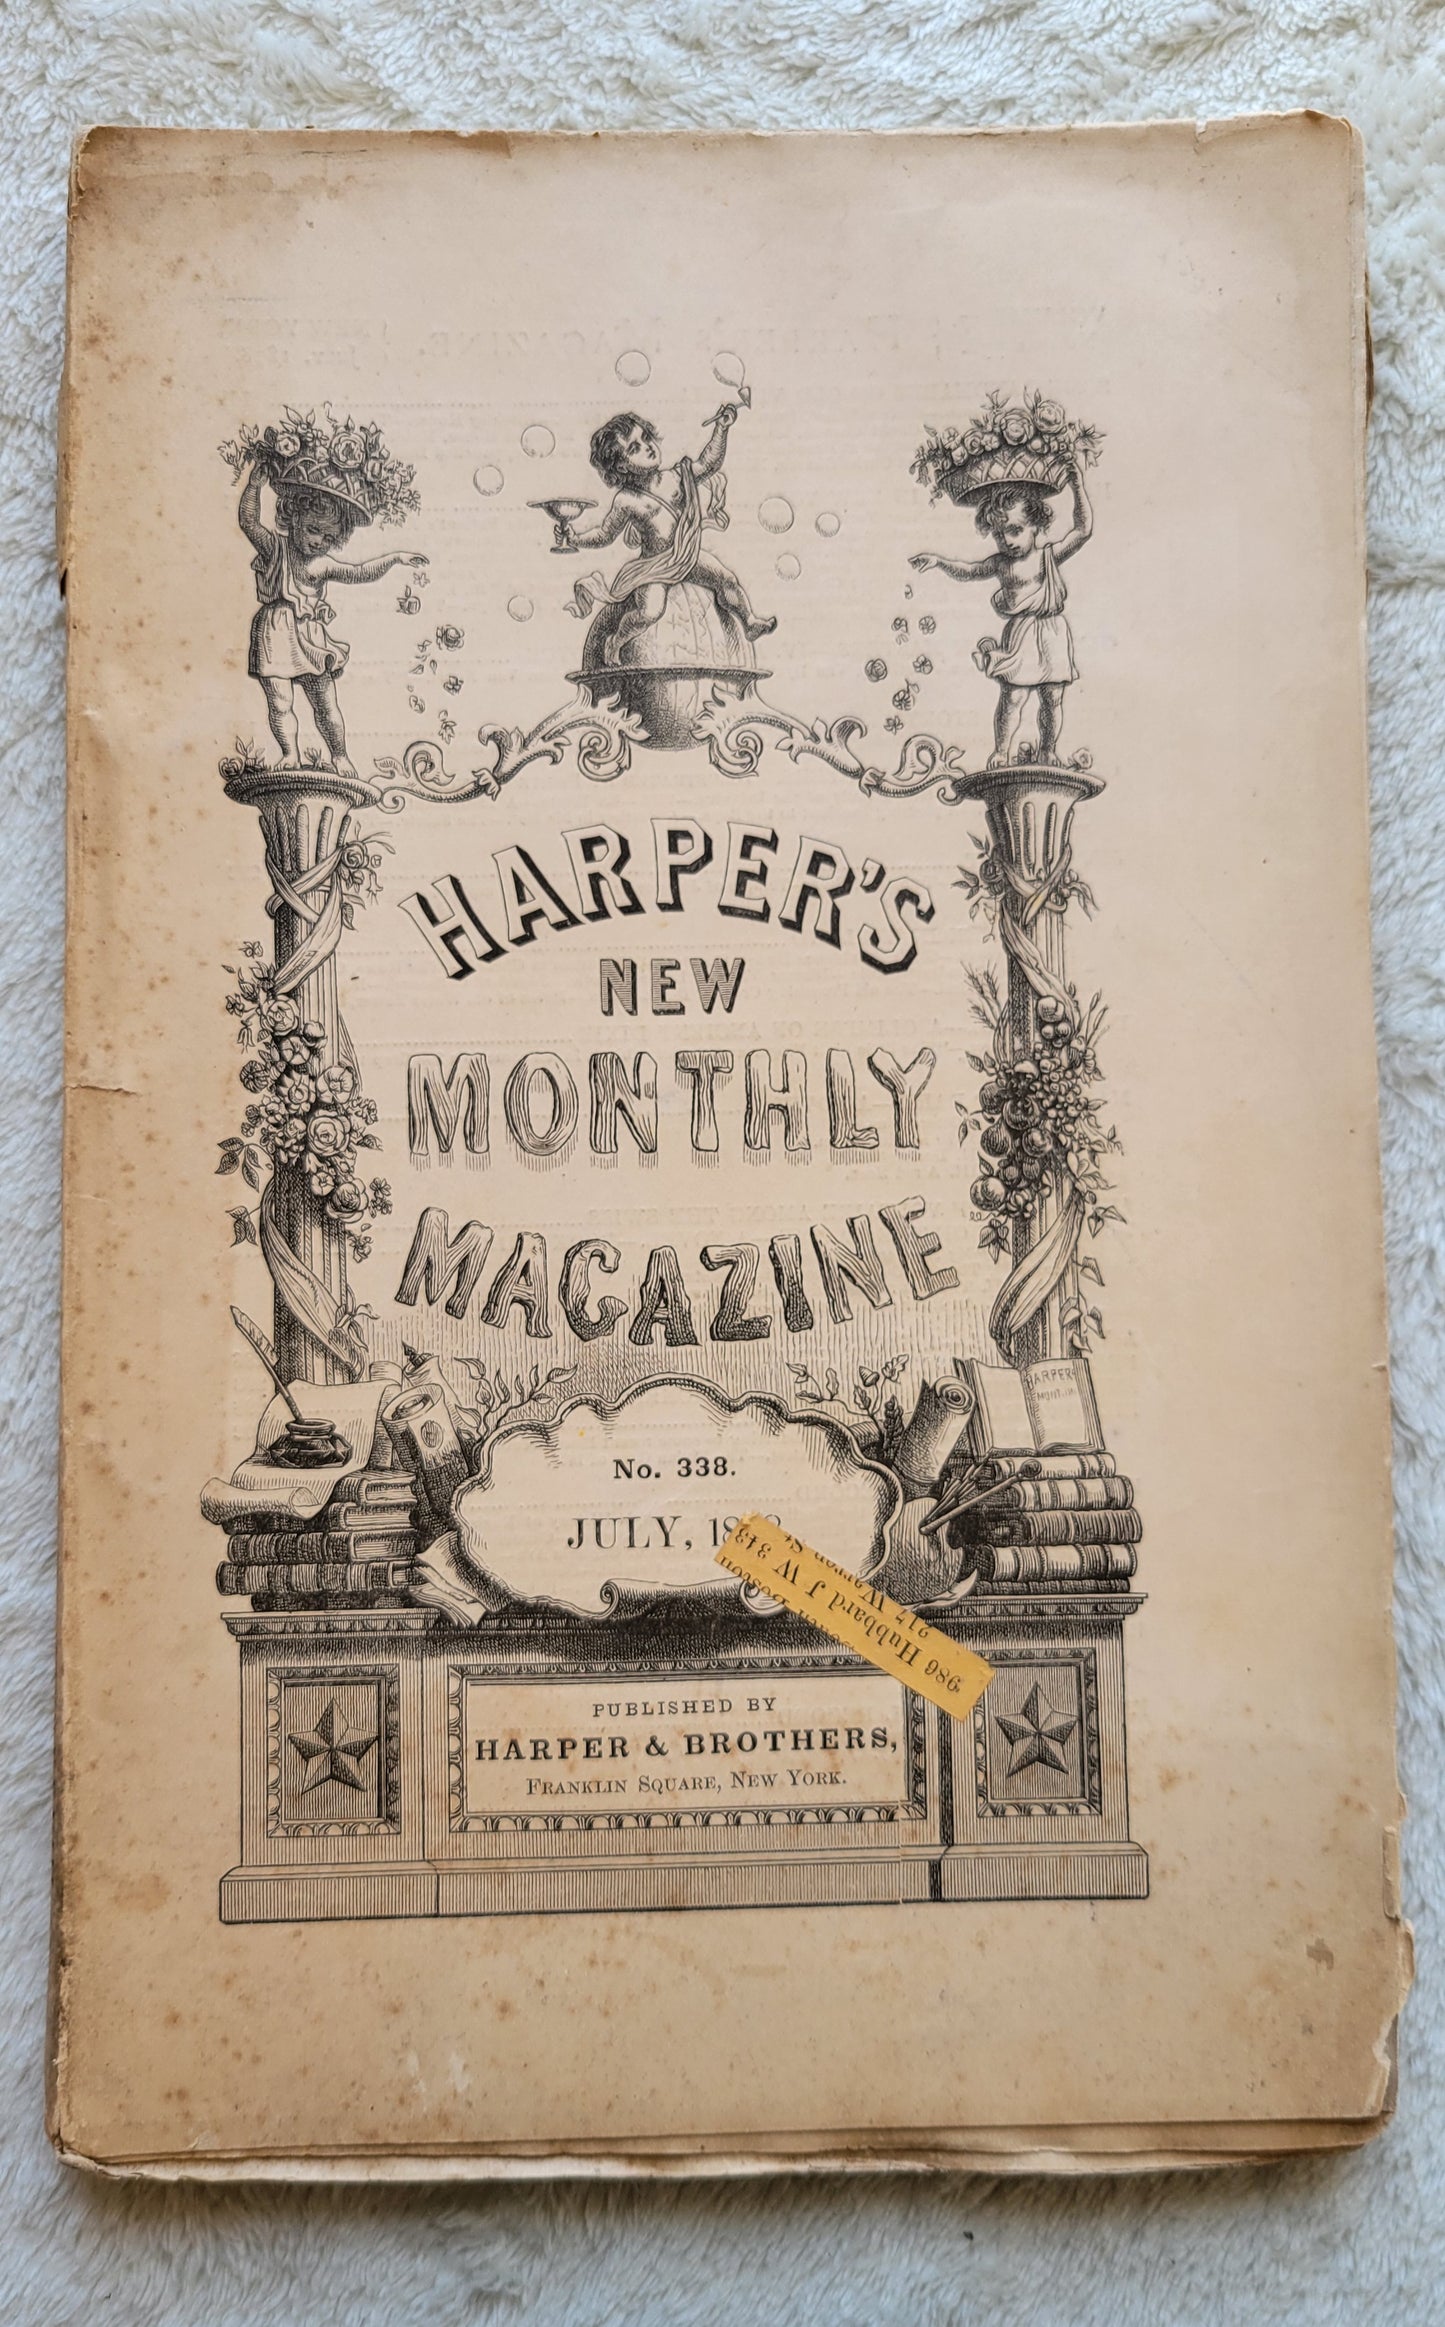 Antique magazine for sale, Volume 57 Number 338, July 1878 of Harper's New Monthly Magazine, published by Harper & Brothers, Franklin Square, New York. View of front cover.